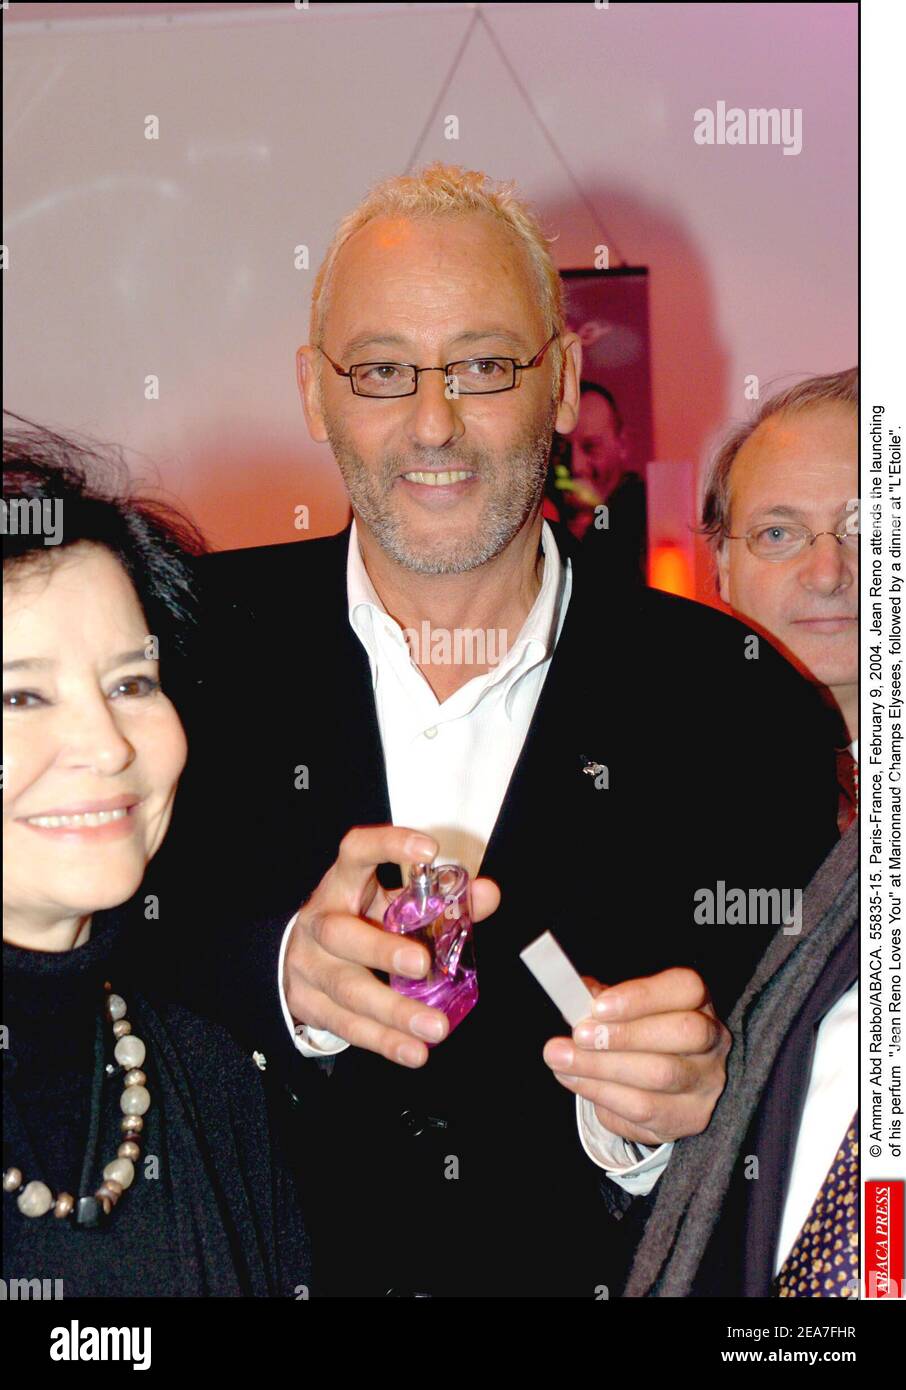 Ammar Abd Rabbo/ABACA. 55835-15. Paris-France, February 9, 2004. Jean Reno  attends the launching of his perfume Jean Reno Loves You at Marionnaud  Champs Elysees, followed by a dinner at L'Etoile Stock